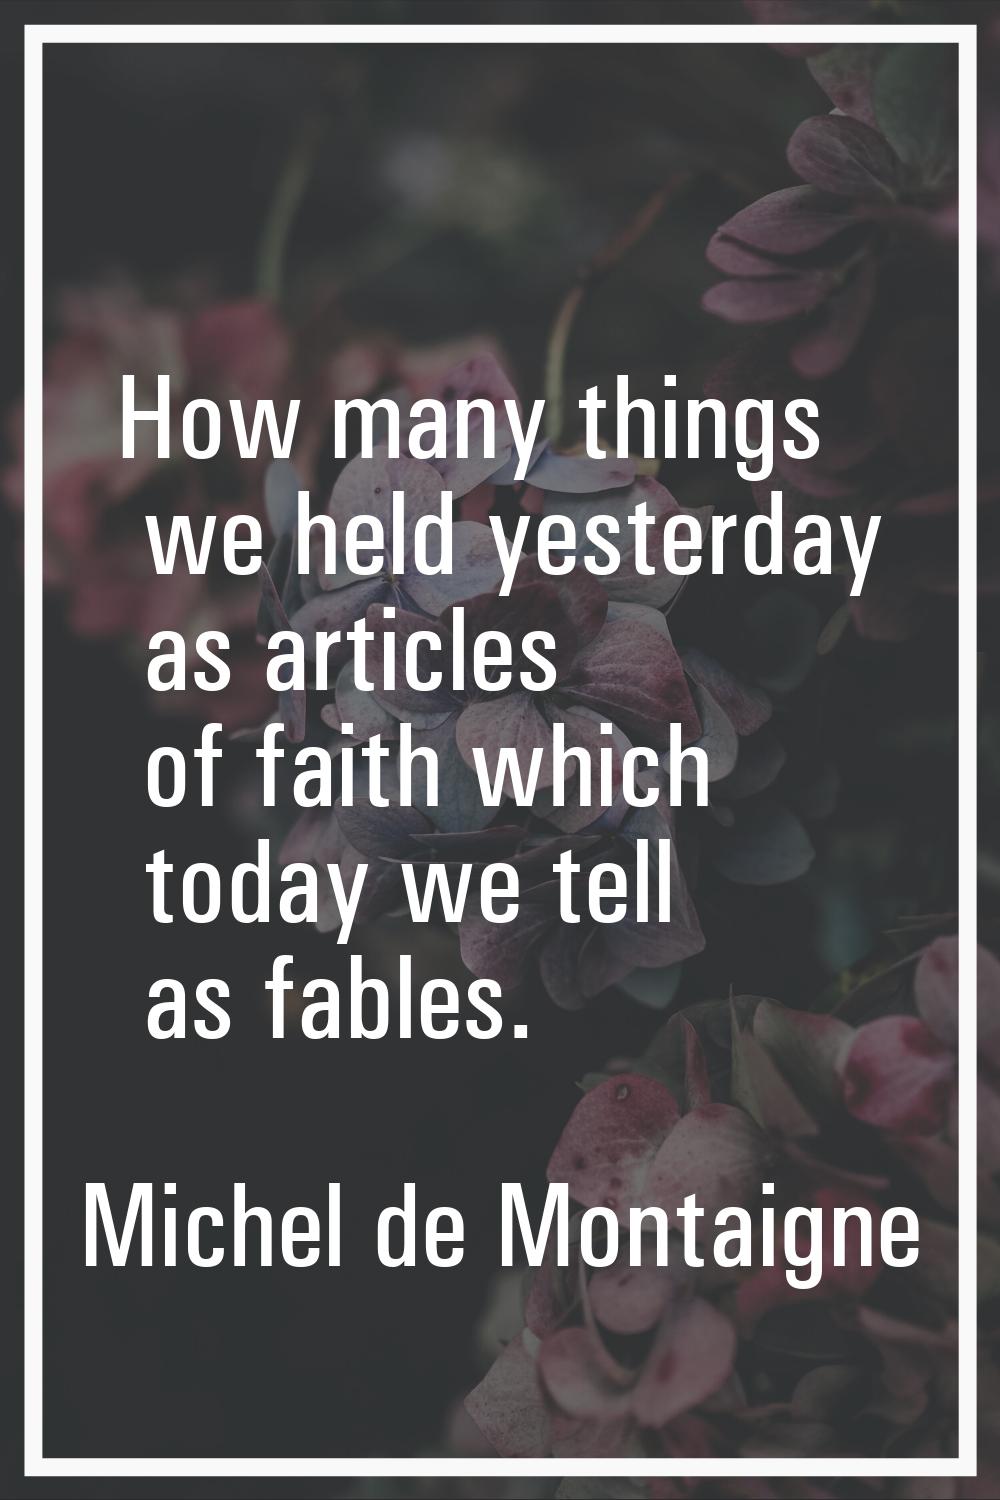 How many things we held yesterday as articles of faith which today we tell as fables.